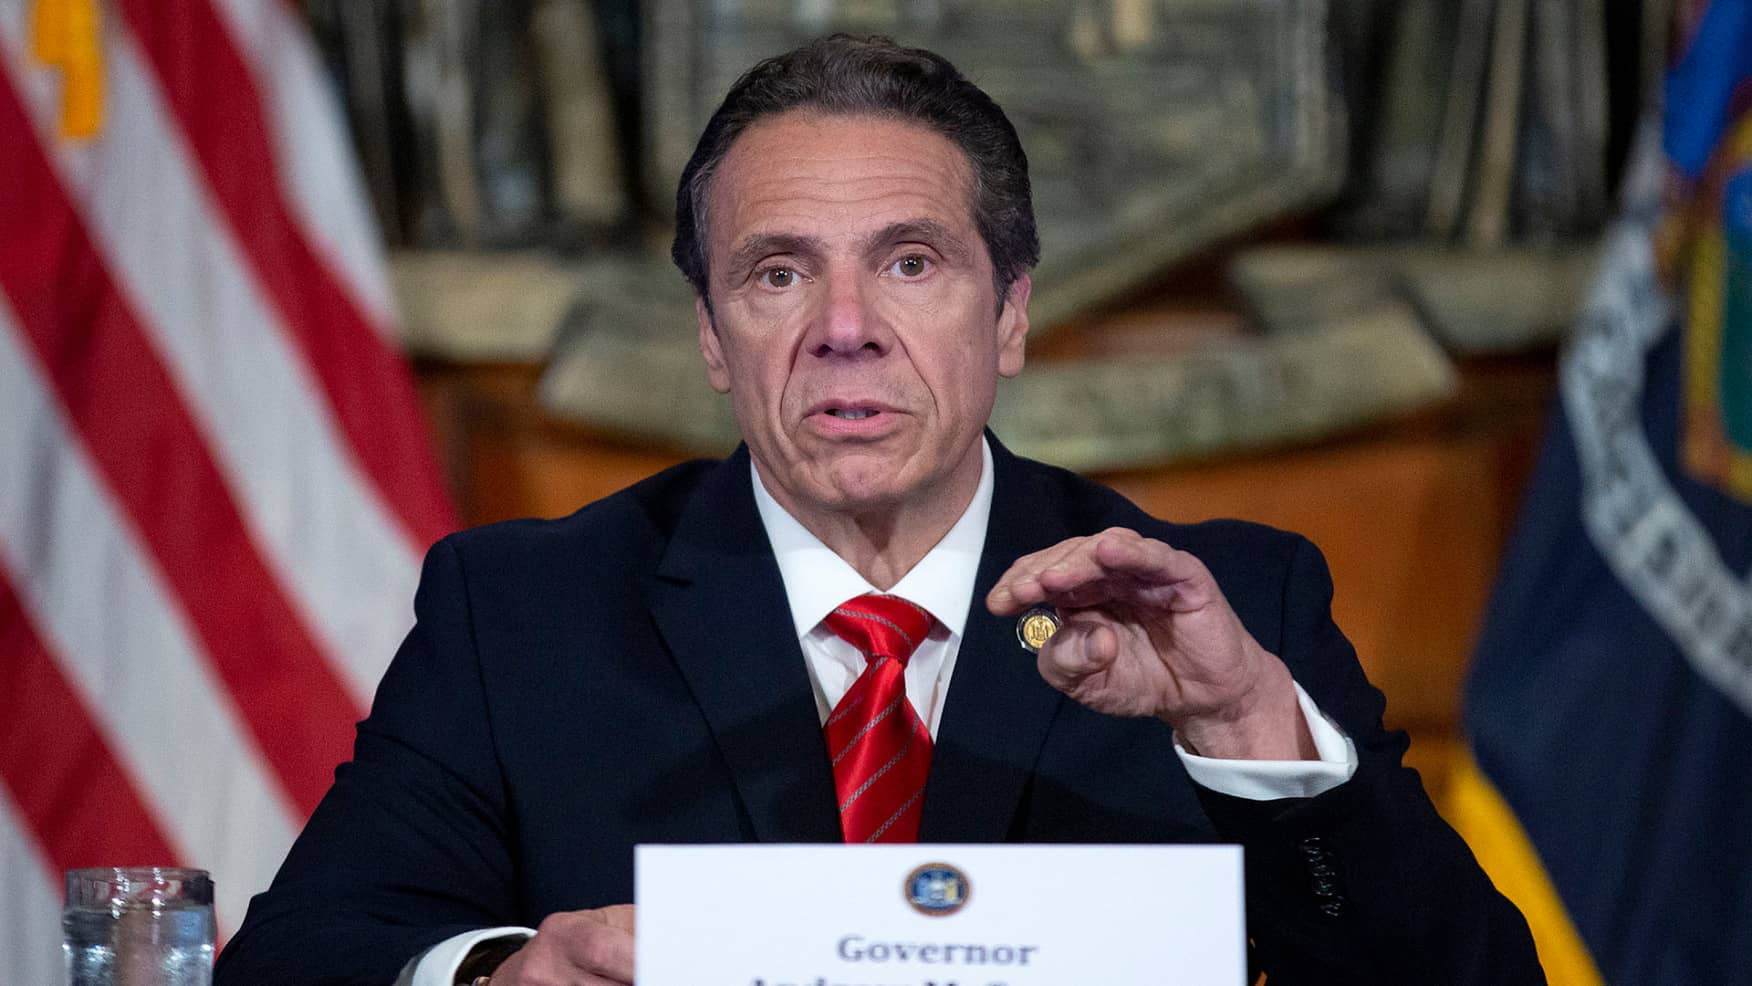 gov-cuomo-holds-daily-briefing-on-coronavirus-pandemic-in-new-york